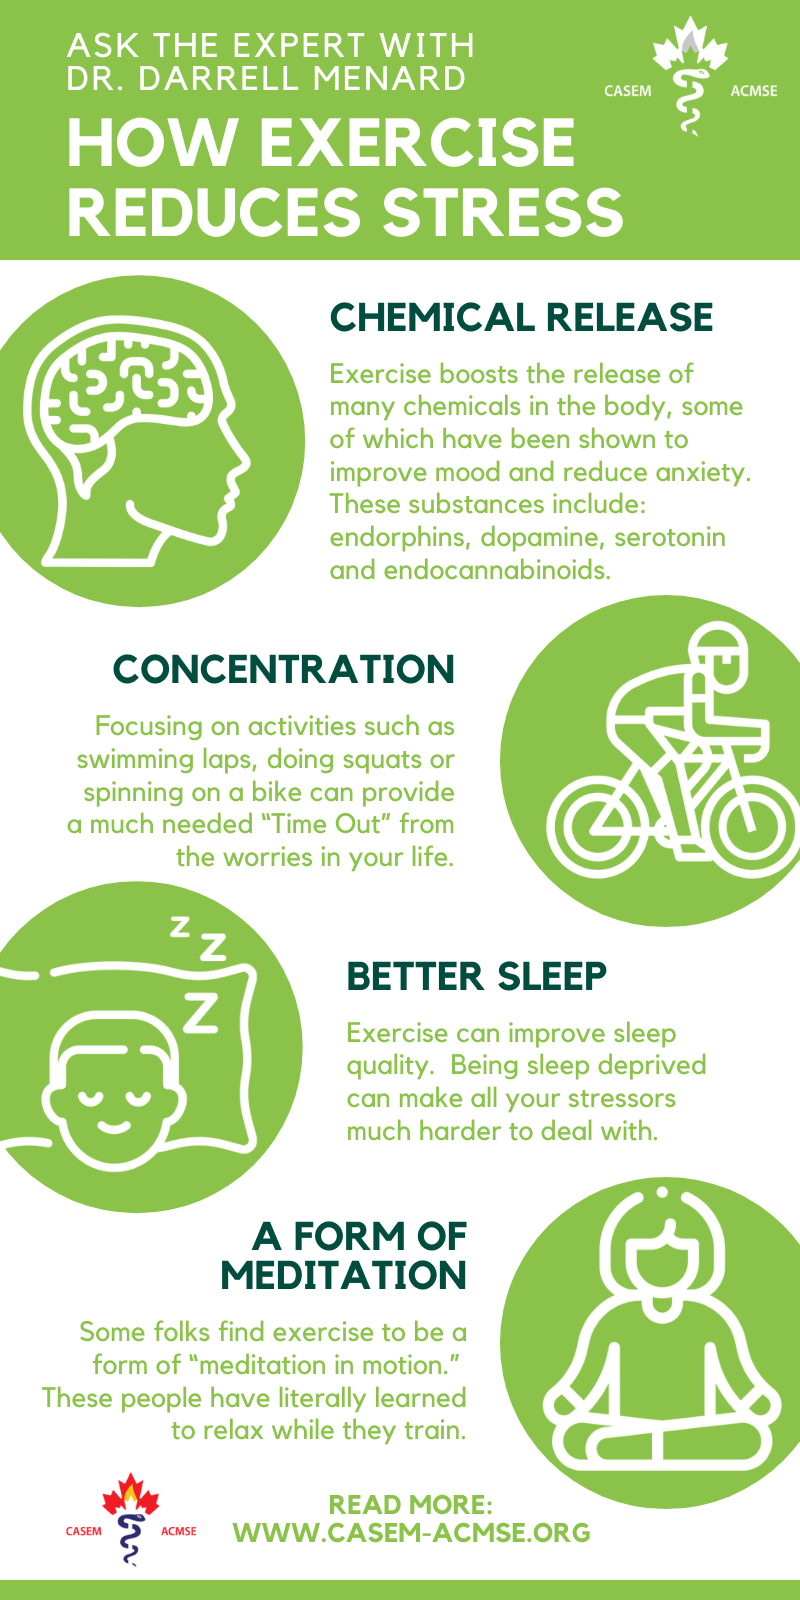 Does exercise help manage stress and improve sleep?